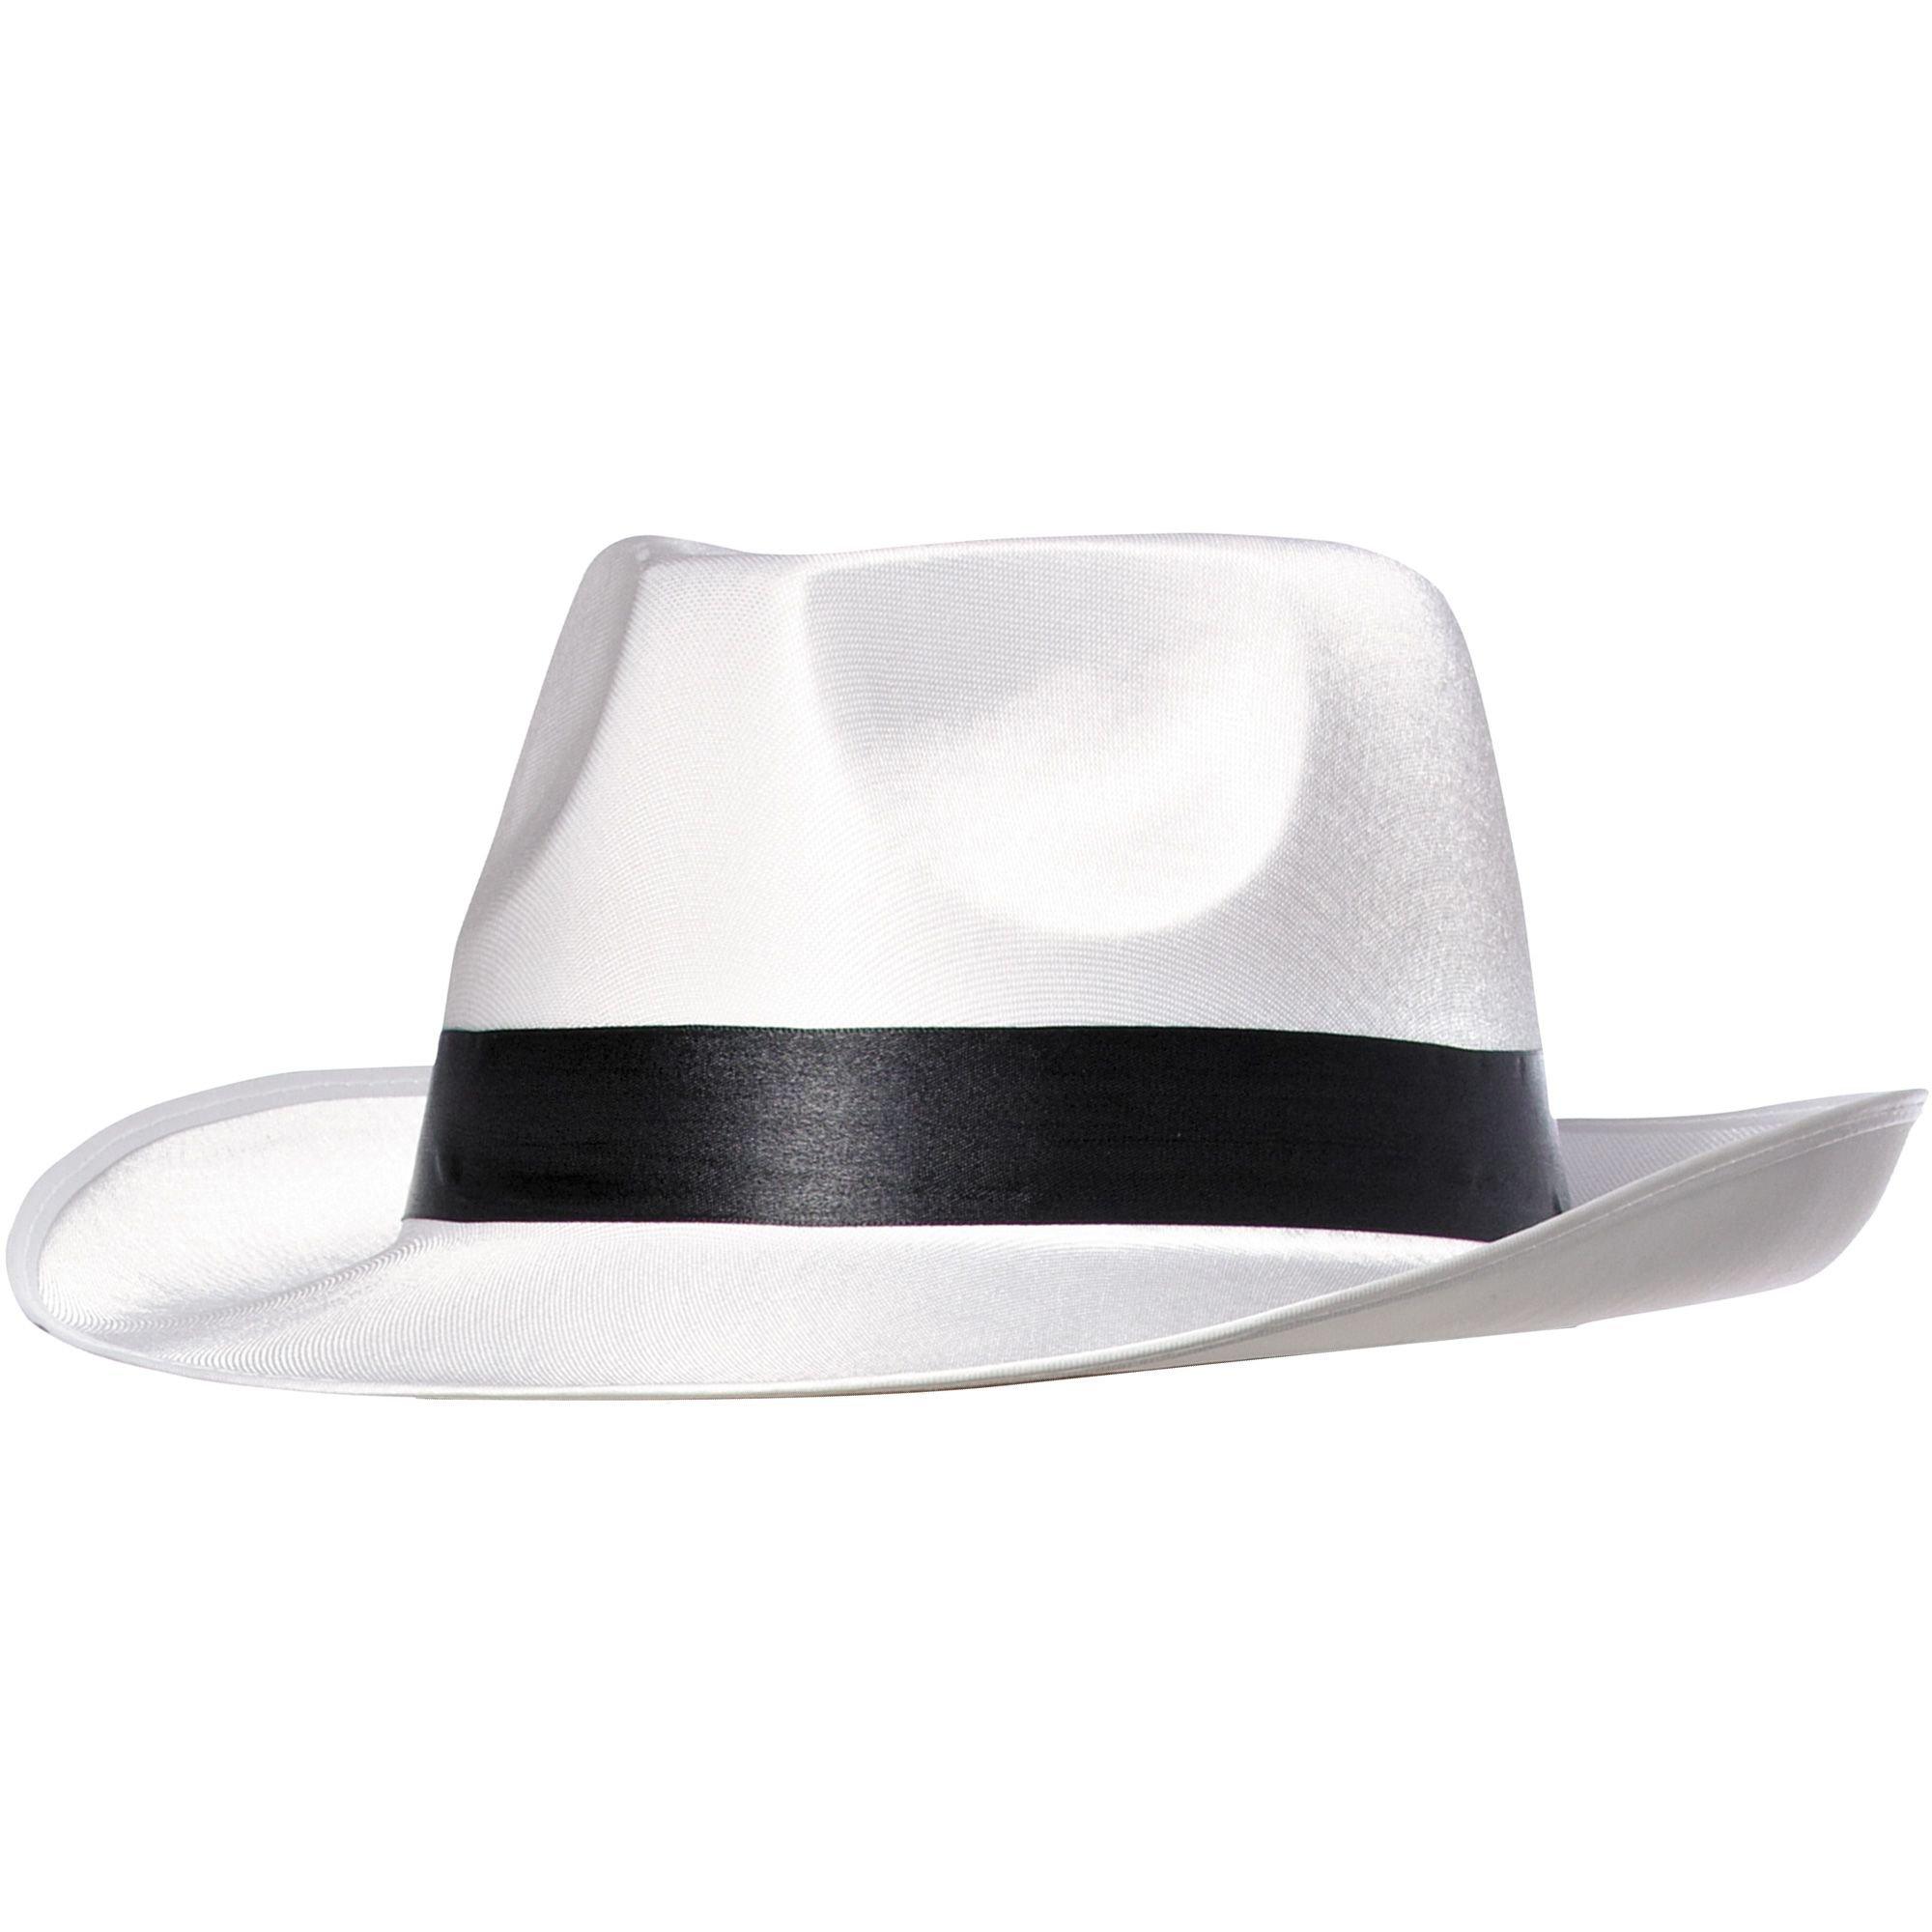 White Gangster Hats (12 Pack)